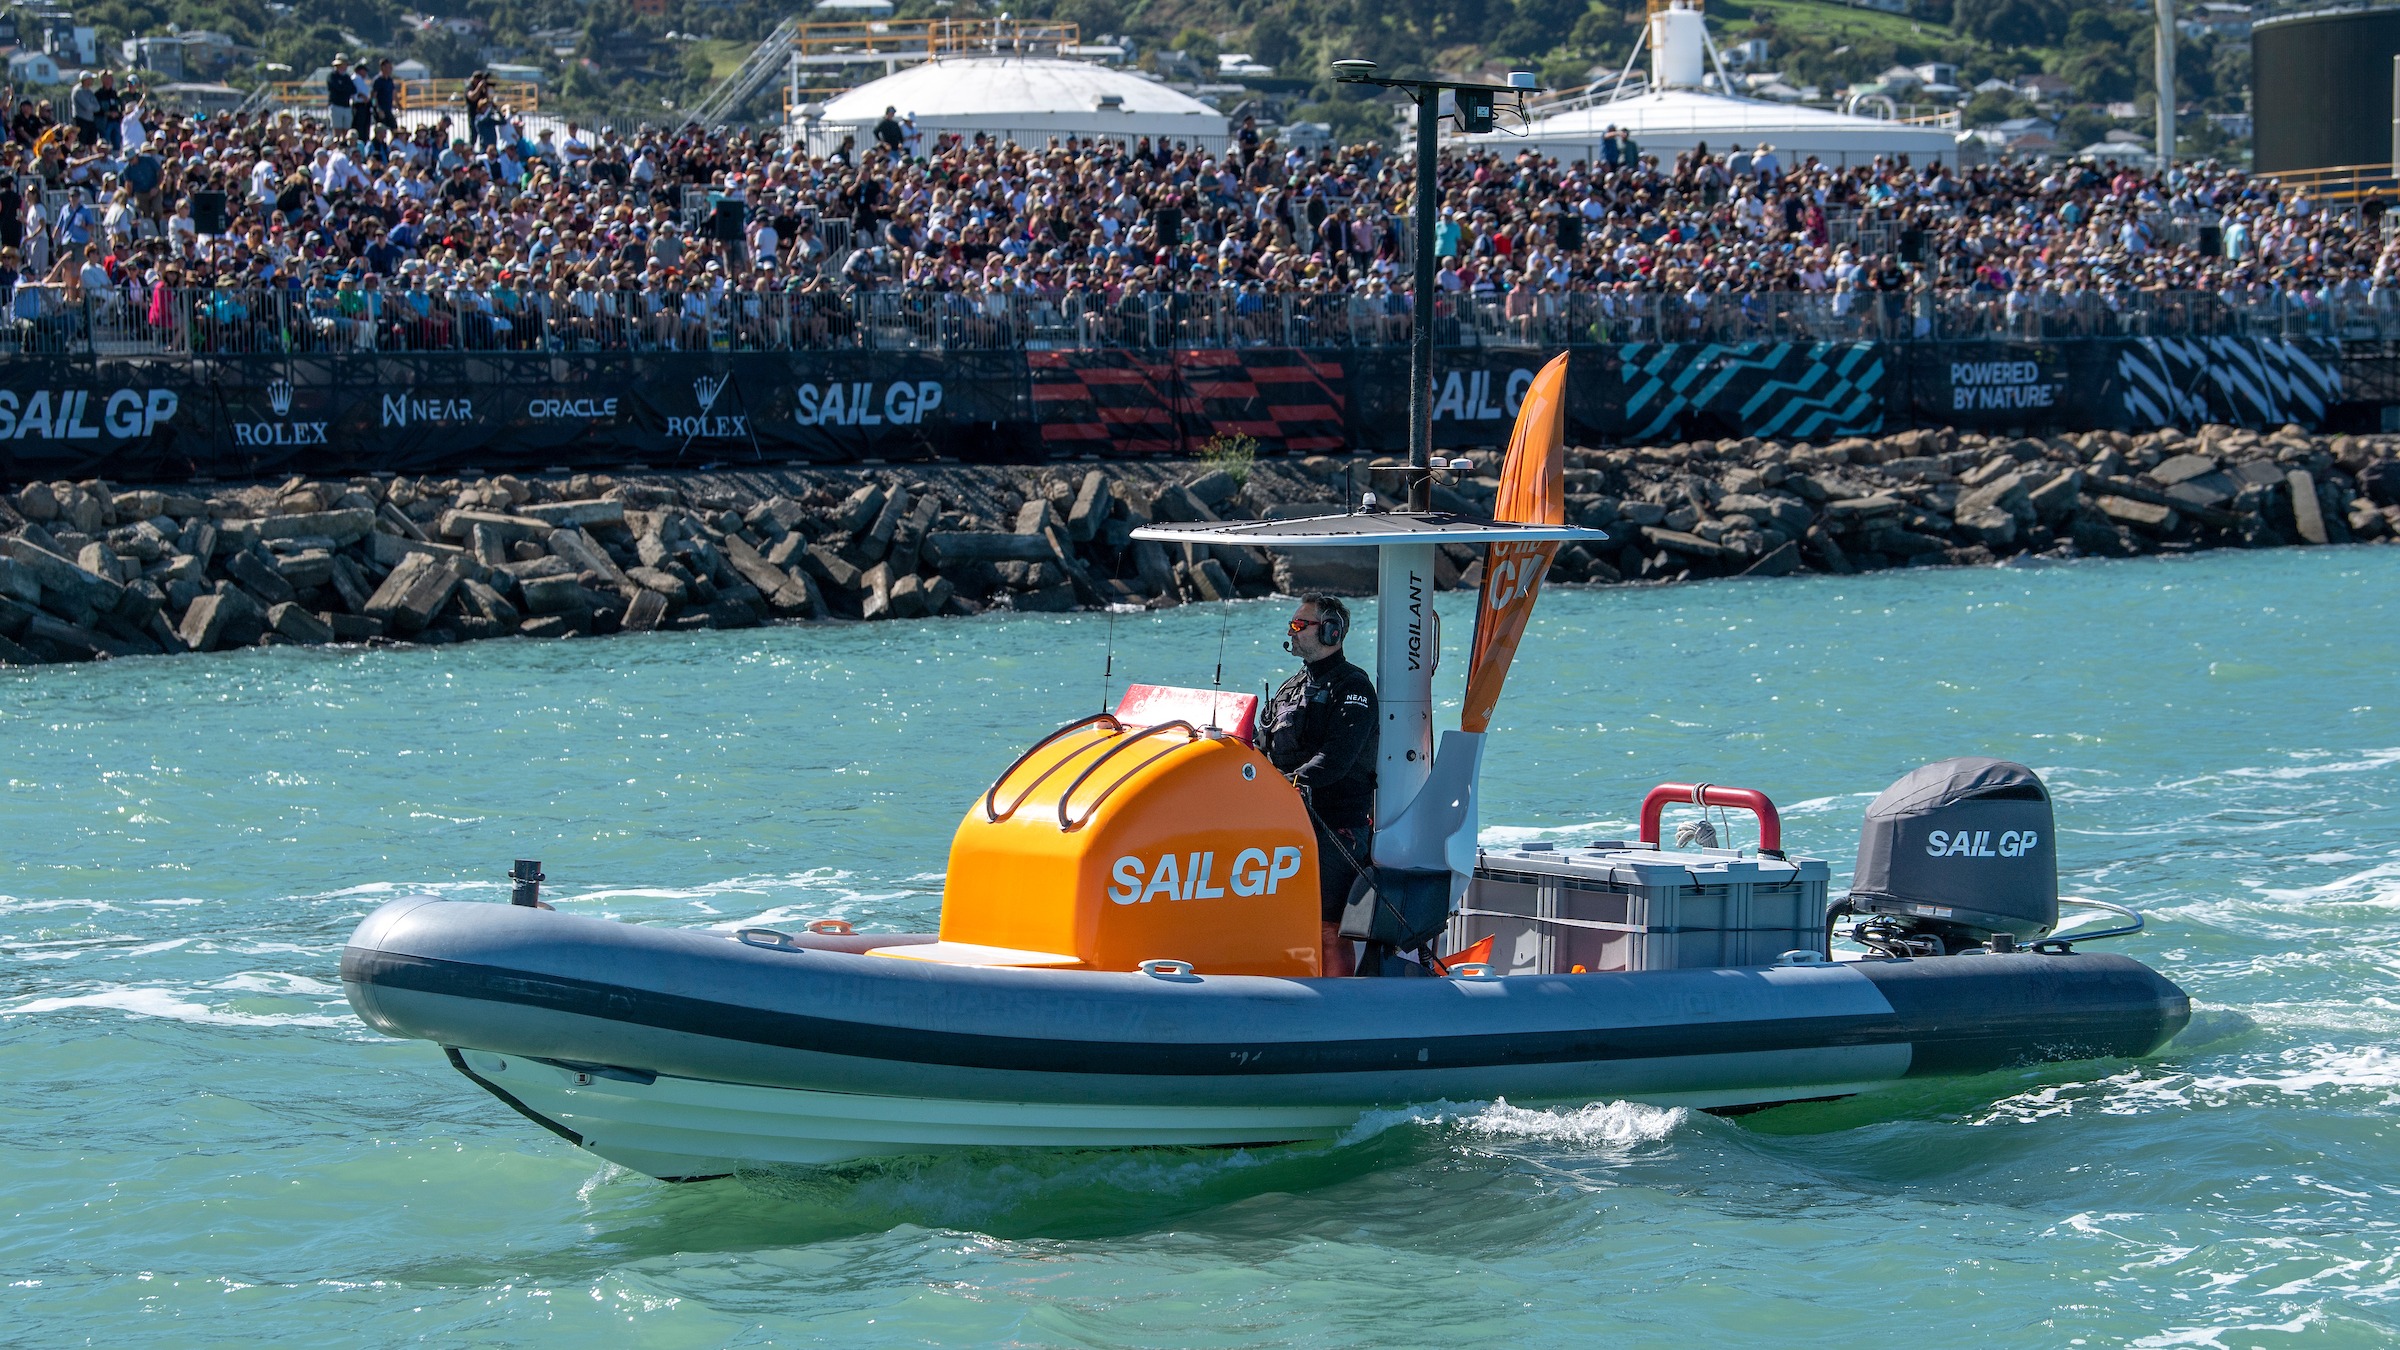 Season 3 // SailGP support boat against the backdrop of crowds in Christchurch, New Zealand